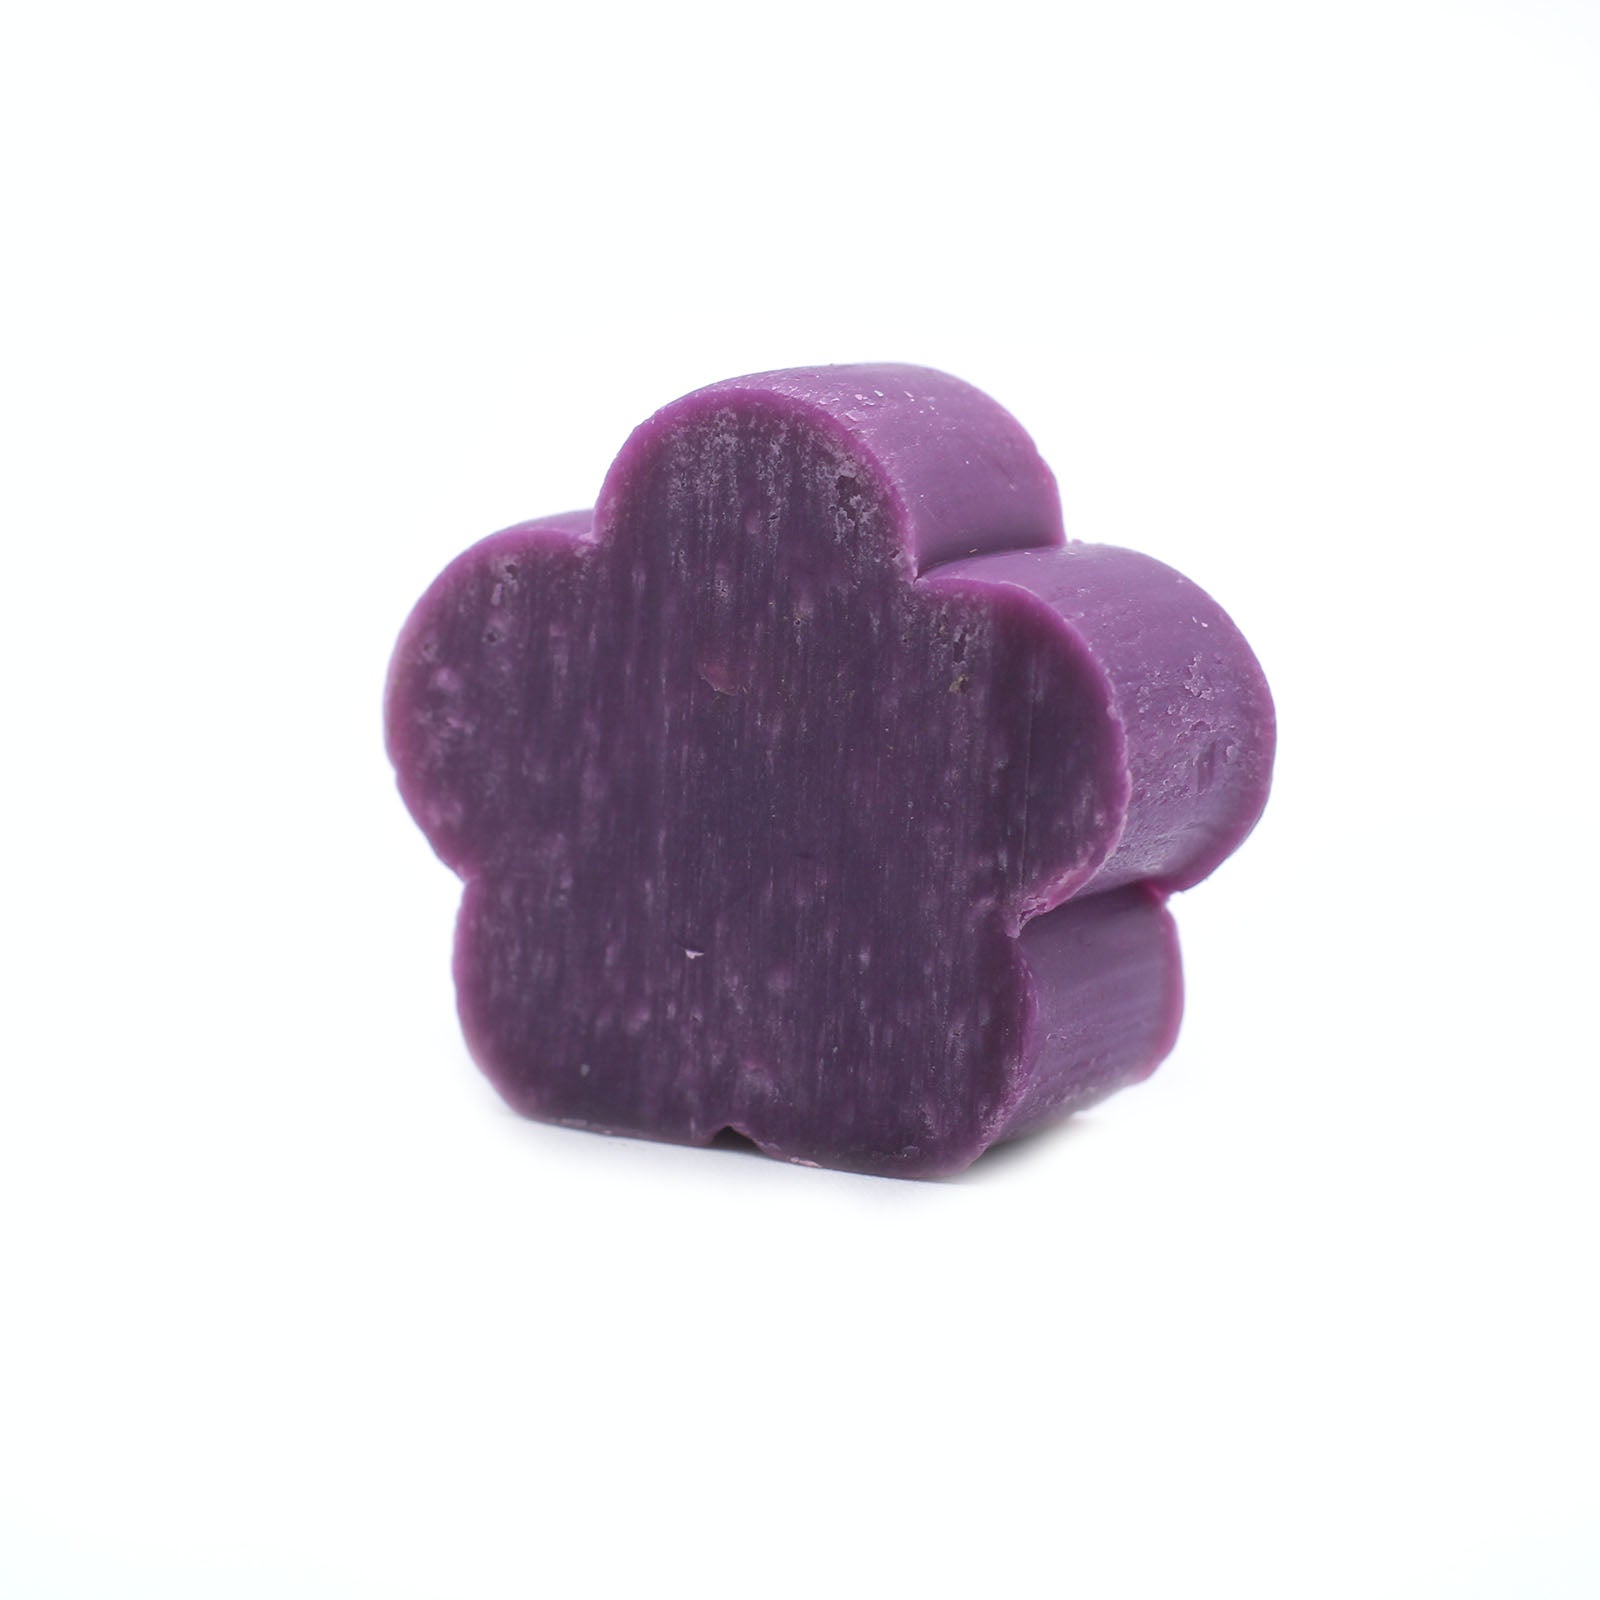 View Flower Guest Soaps Lilac information